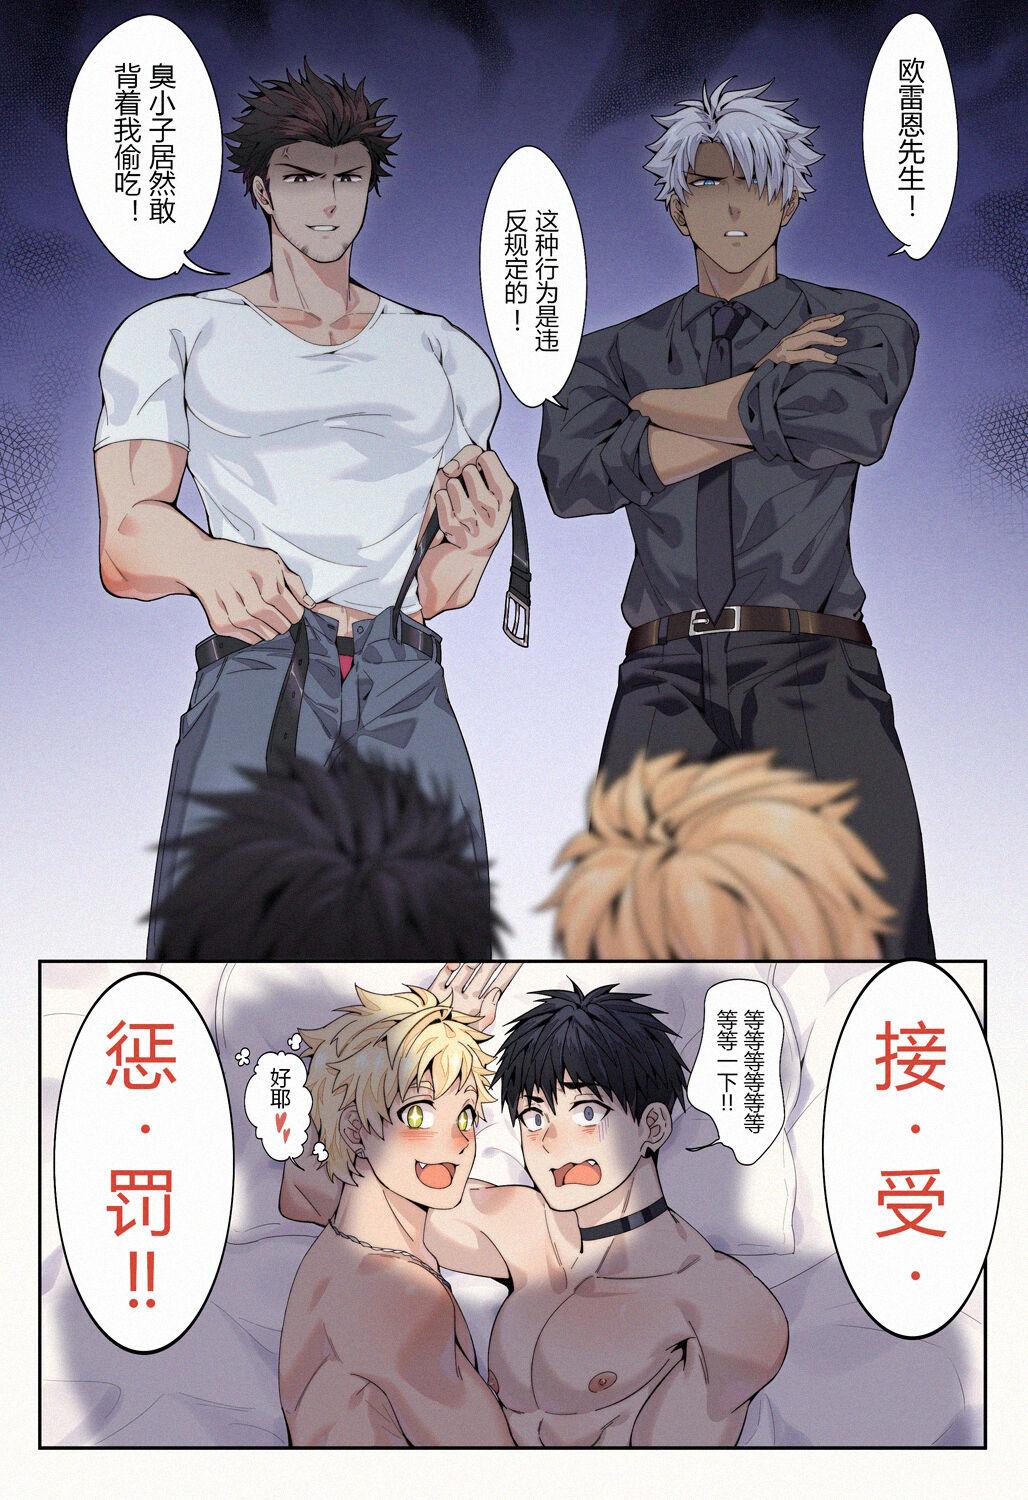 Spoon OC互攻小剧场 Gay Physicals - Page 4